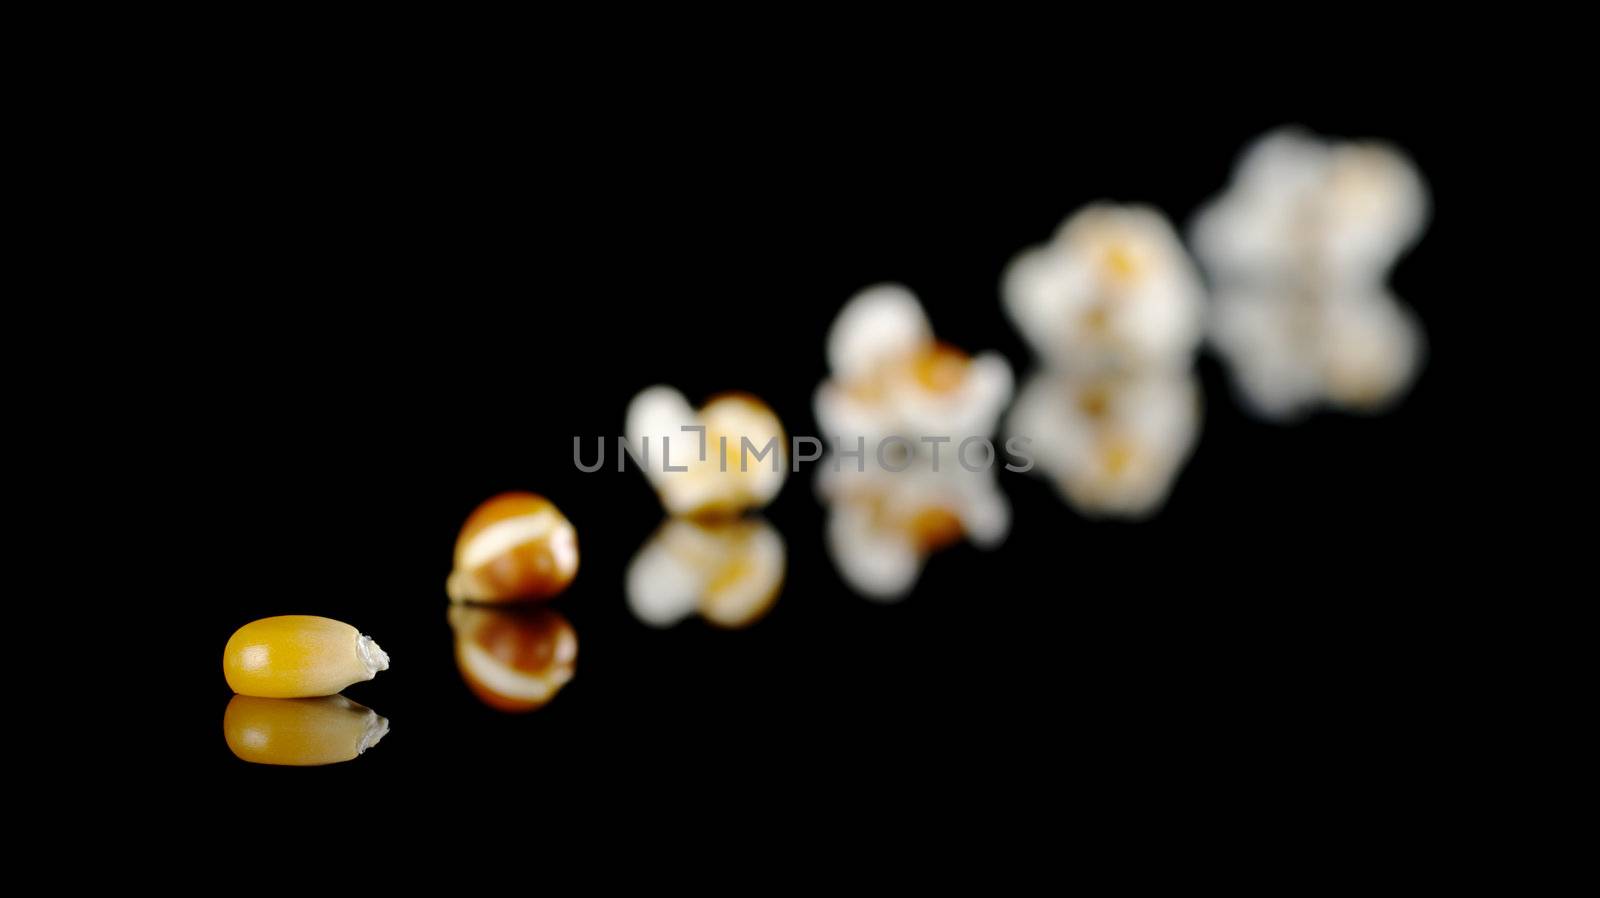 The different stages from the maize kernel to the popcorn photographed on black with reflection (Selective Focus, Focus on the maize kernel on the front)